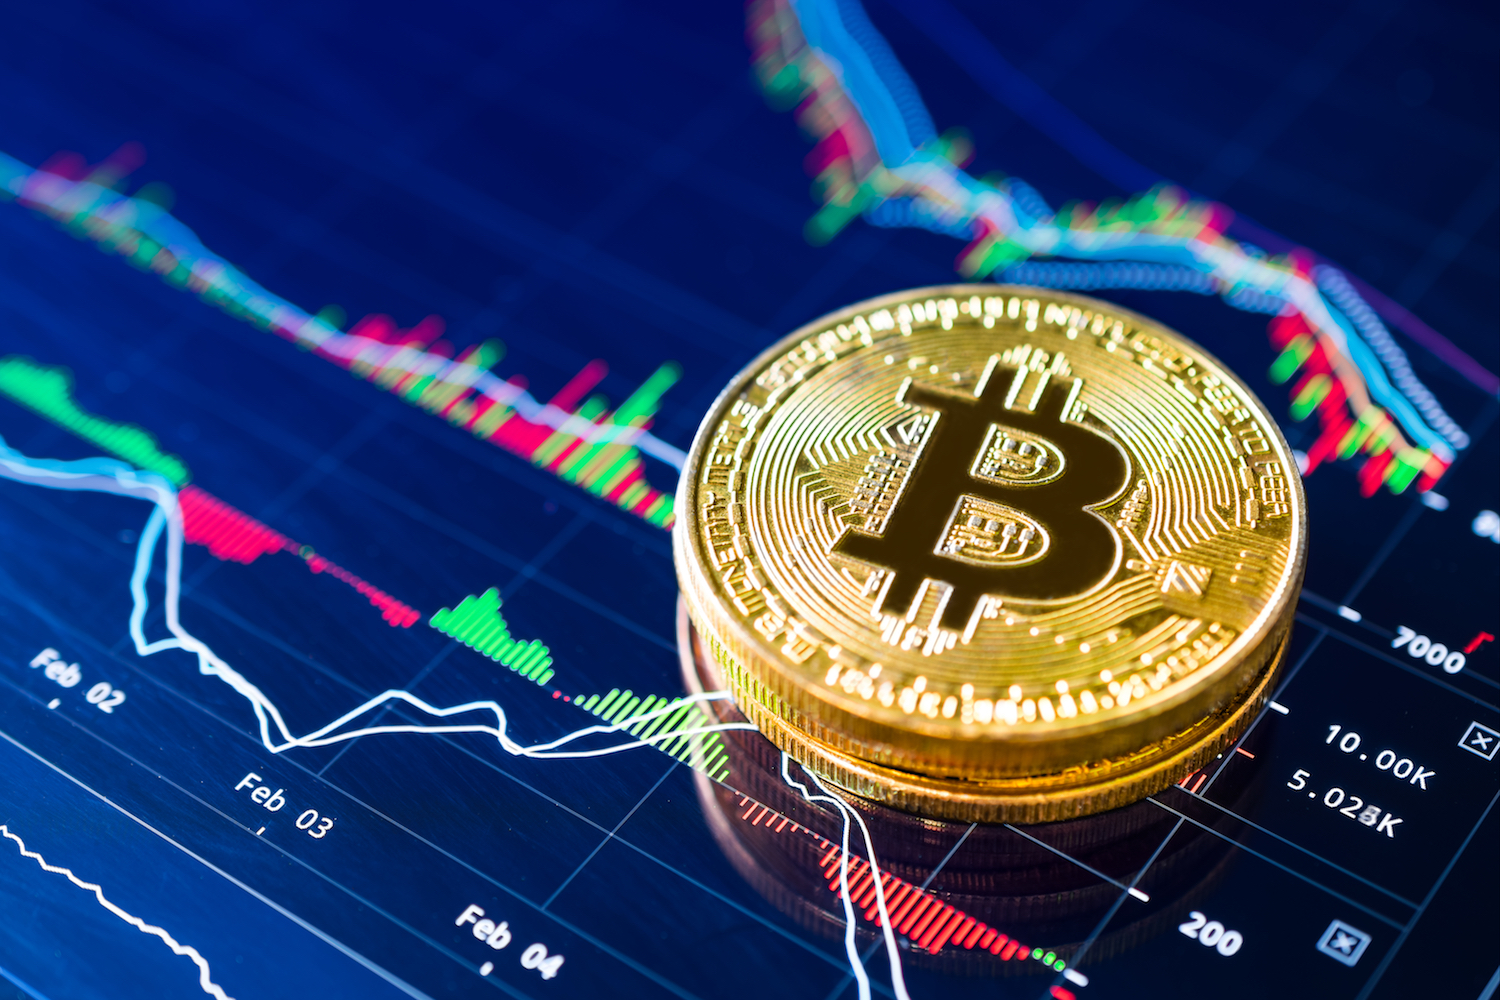 Bitcoin Price Nears $12K After Rising $500 In Minutes